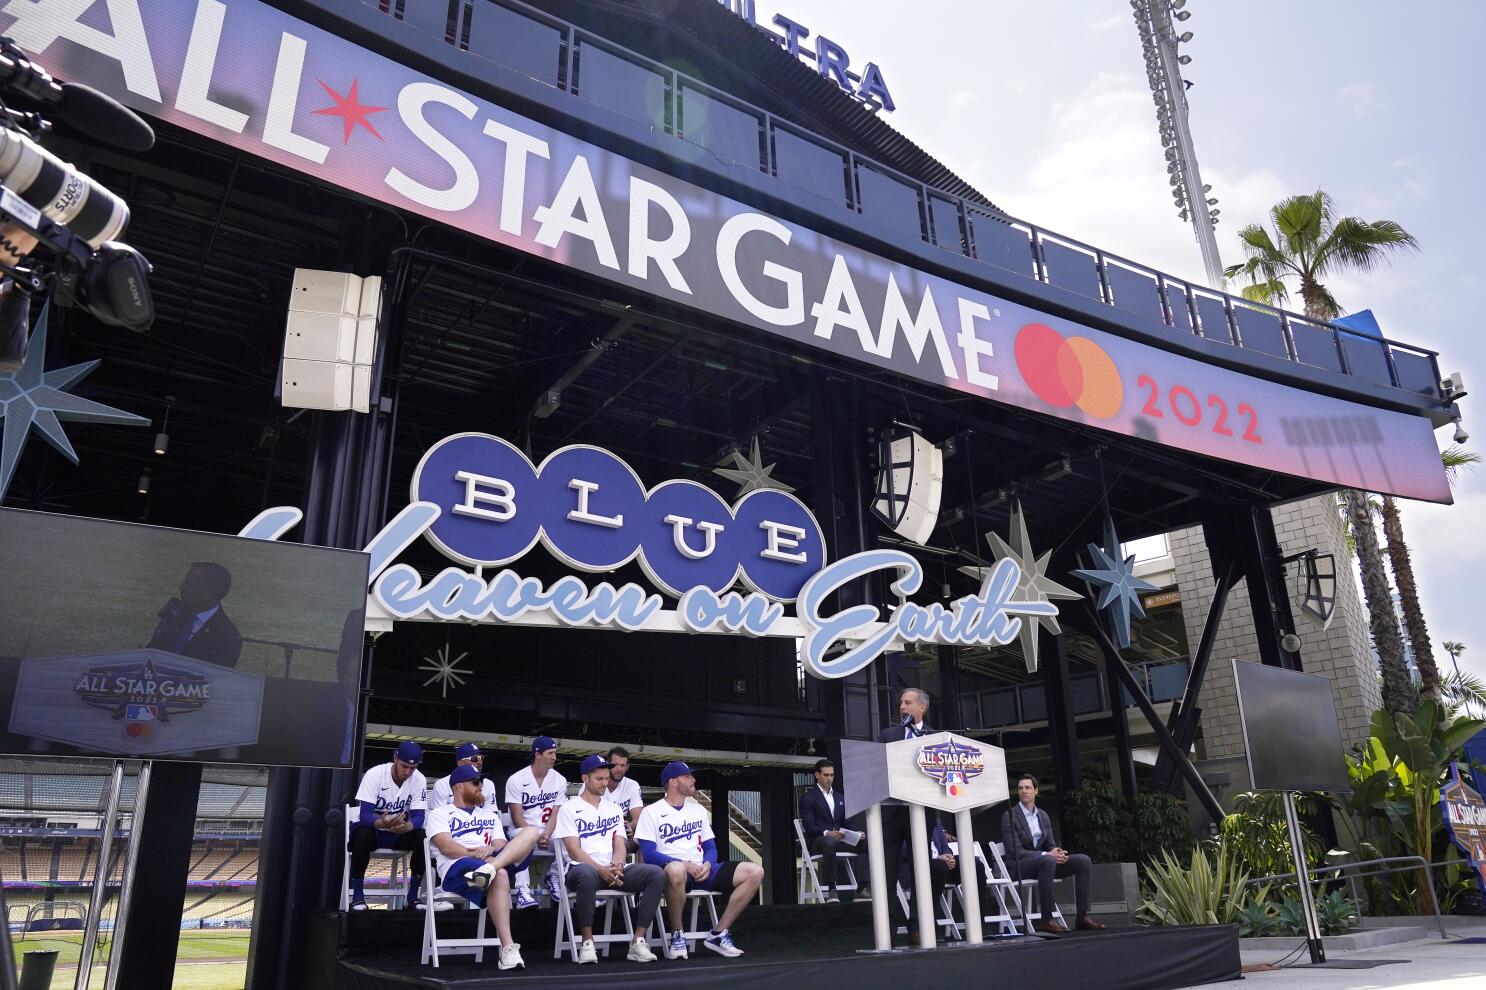 MLB All-Star Games 2022: Celebrities at the Events [PHOTOS]